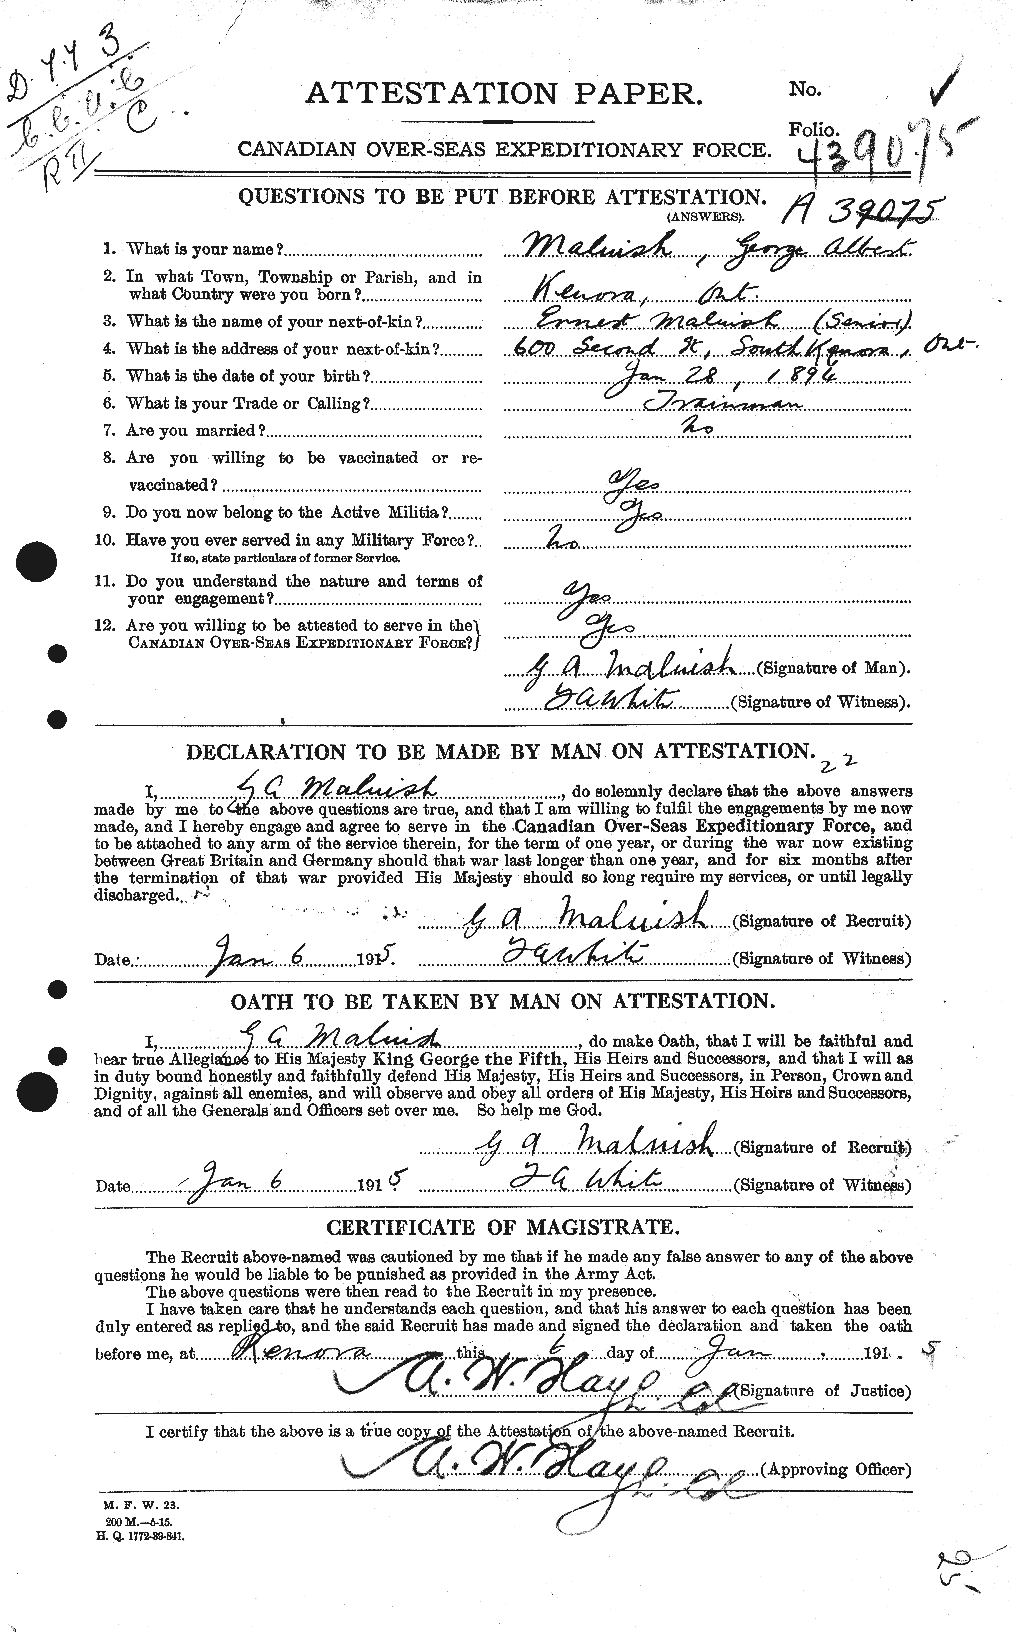 Personnel Records of the First World War - CEF 480932a